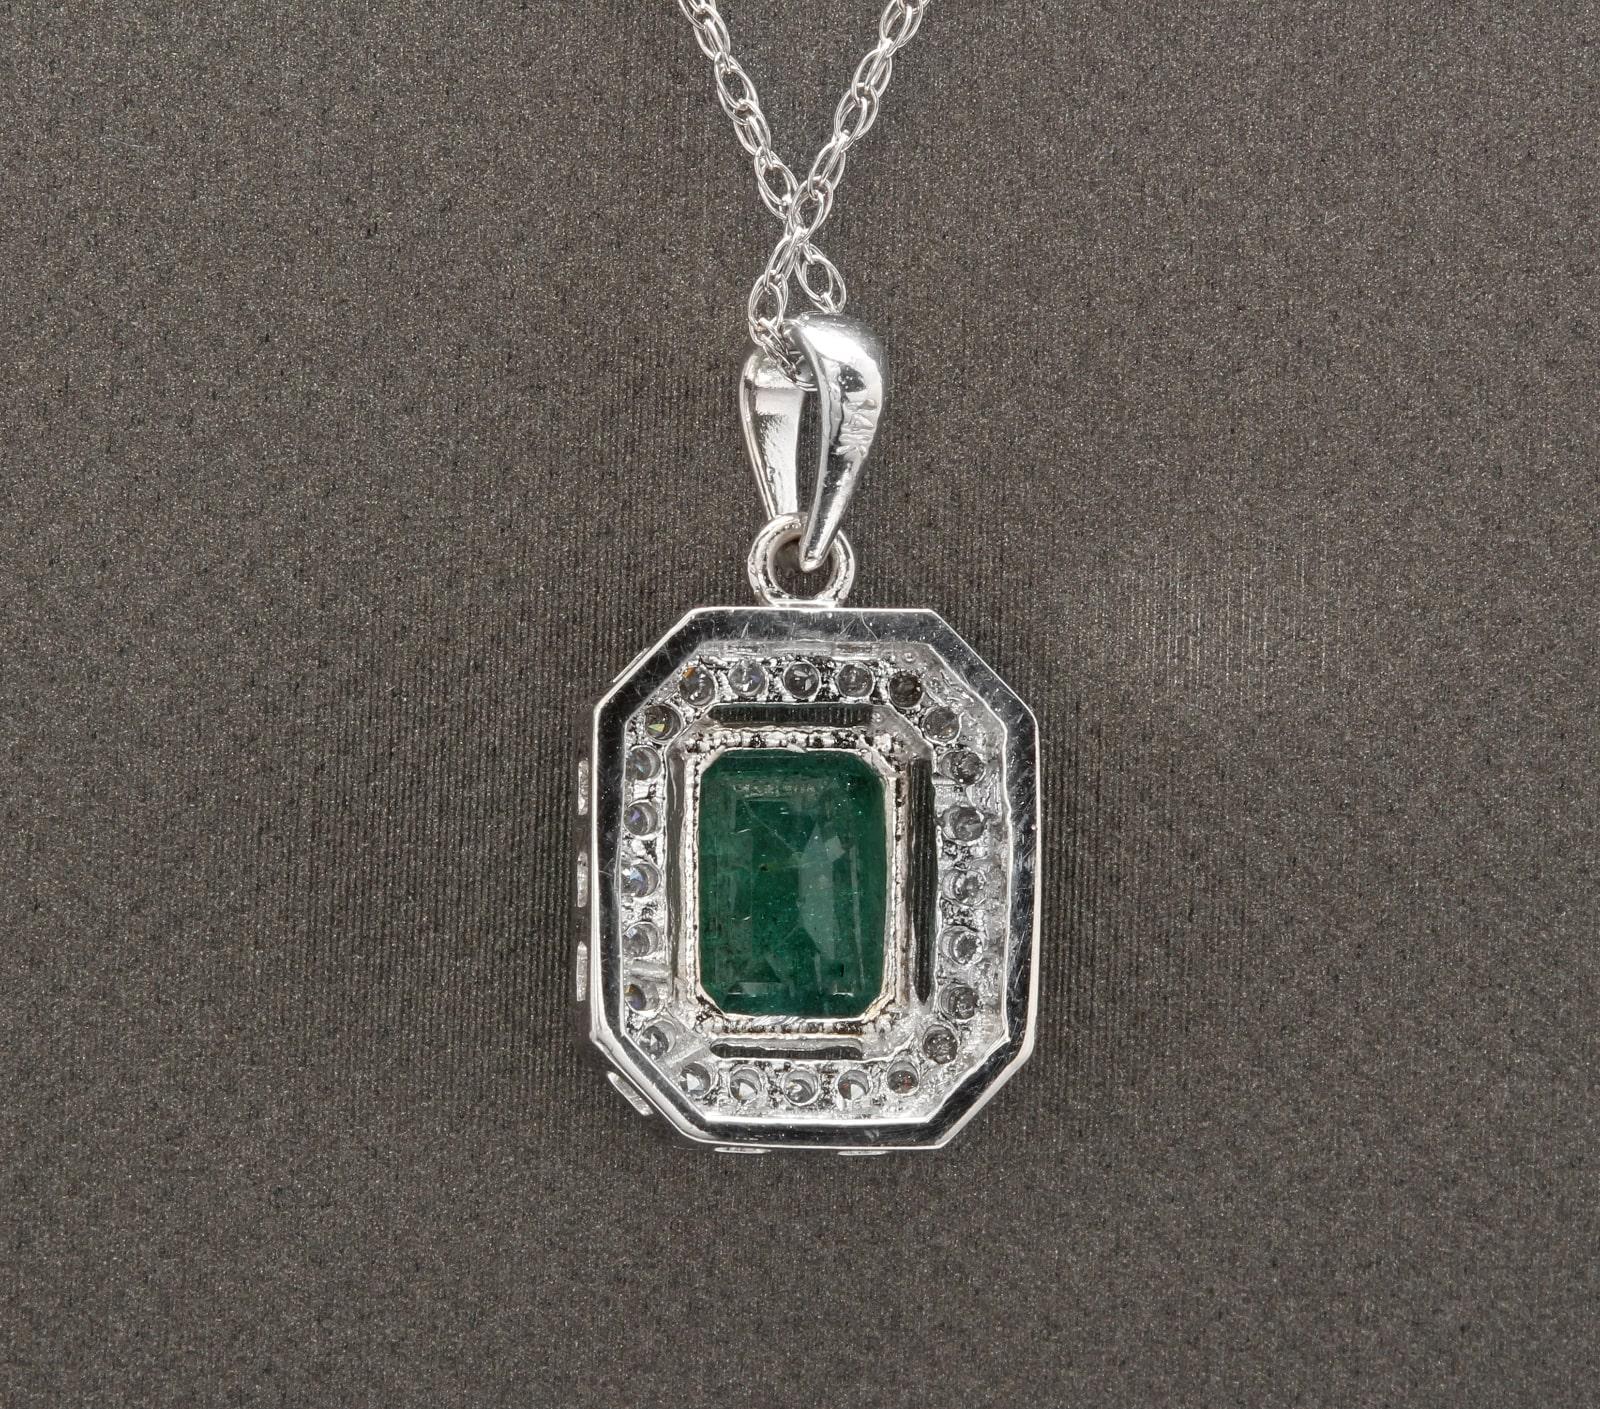 1.95Ct Natural Emerald and Diamond 14K Solid White Gold Necklace

Amazing looking piece! 

Stamped: 14K

Suggested Replacement Value: $3,500.00 

Natural Emerald Weights: Approx. 1.70 Carats

Emerald Measures: Approx. 8.00 x 6.00mm

Total Natural